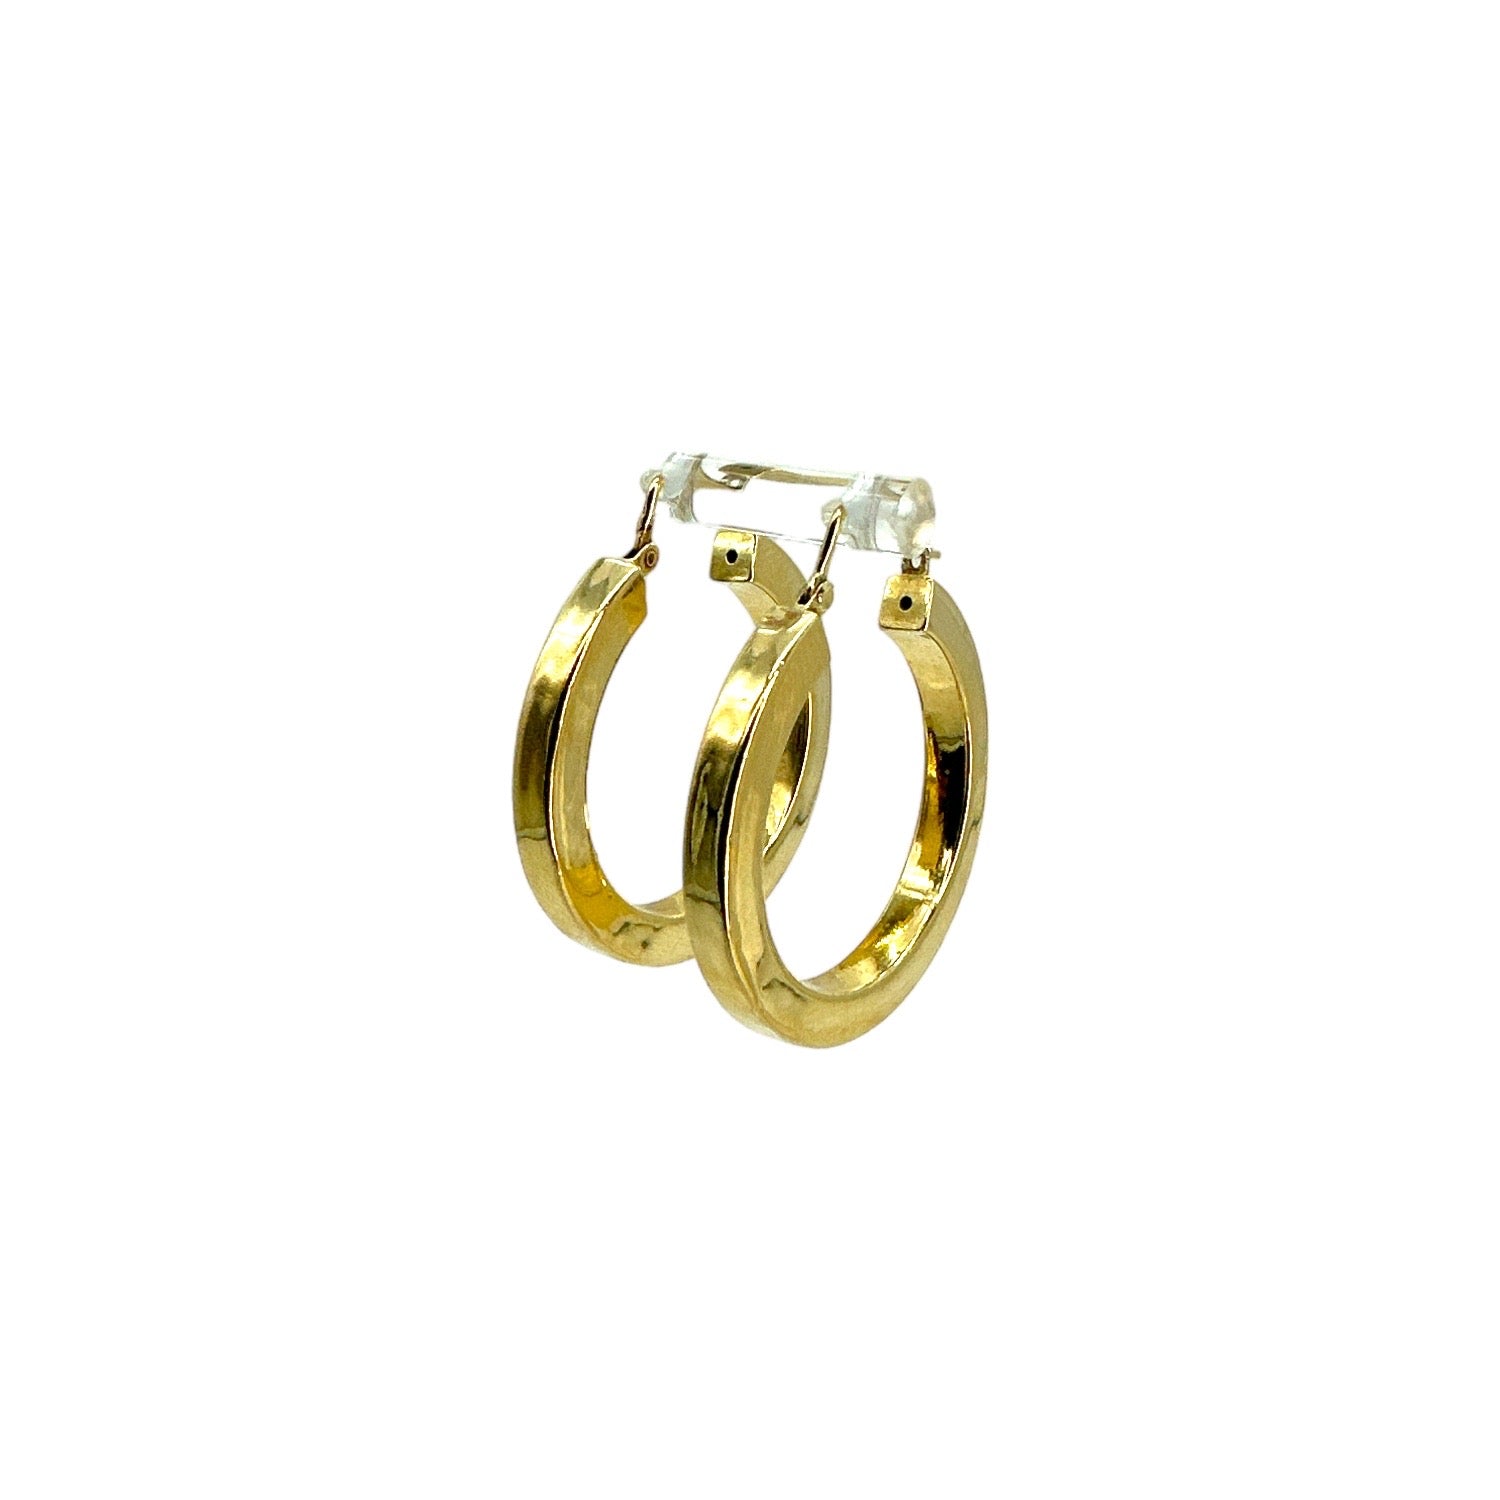 24K 995 Pure Gold Hoop Earrings with Blue Color Stones for Women -  1-GER-V00600 in 3.250 Grams